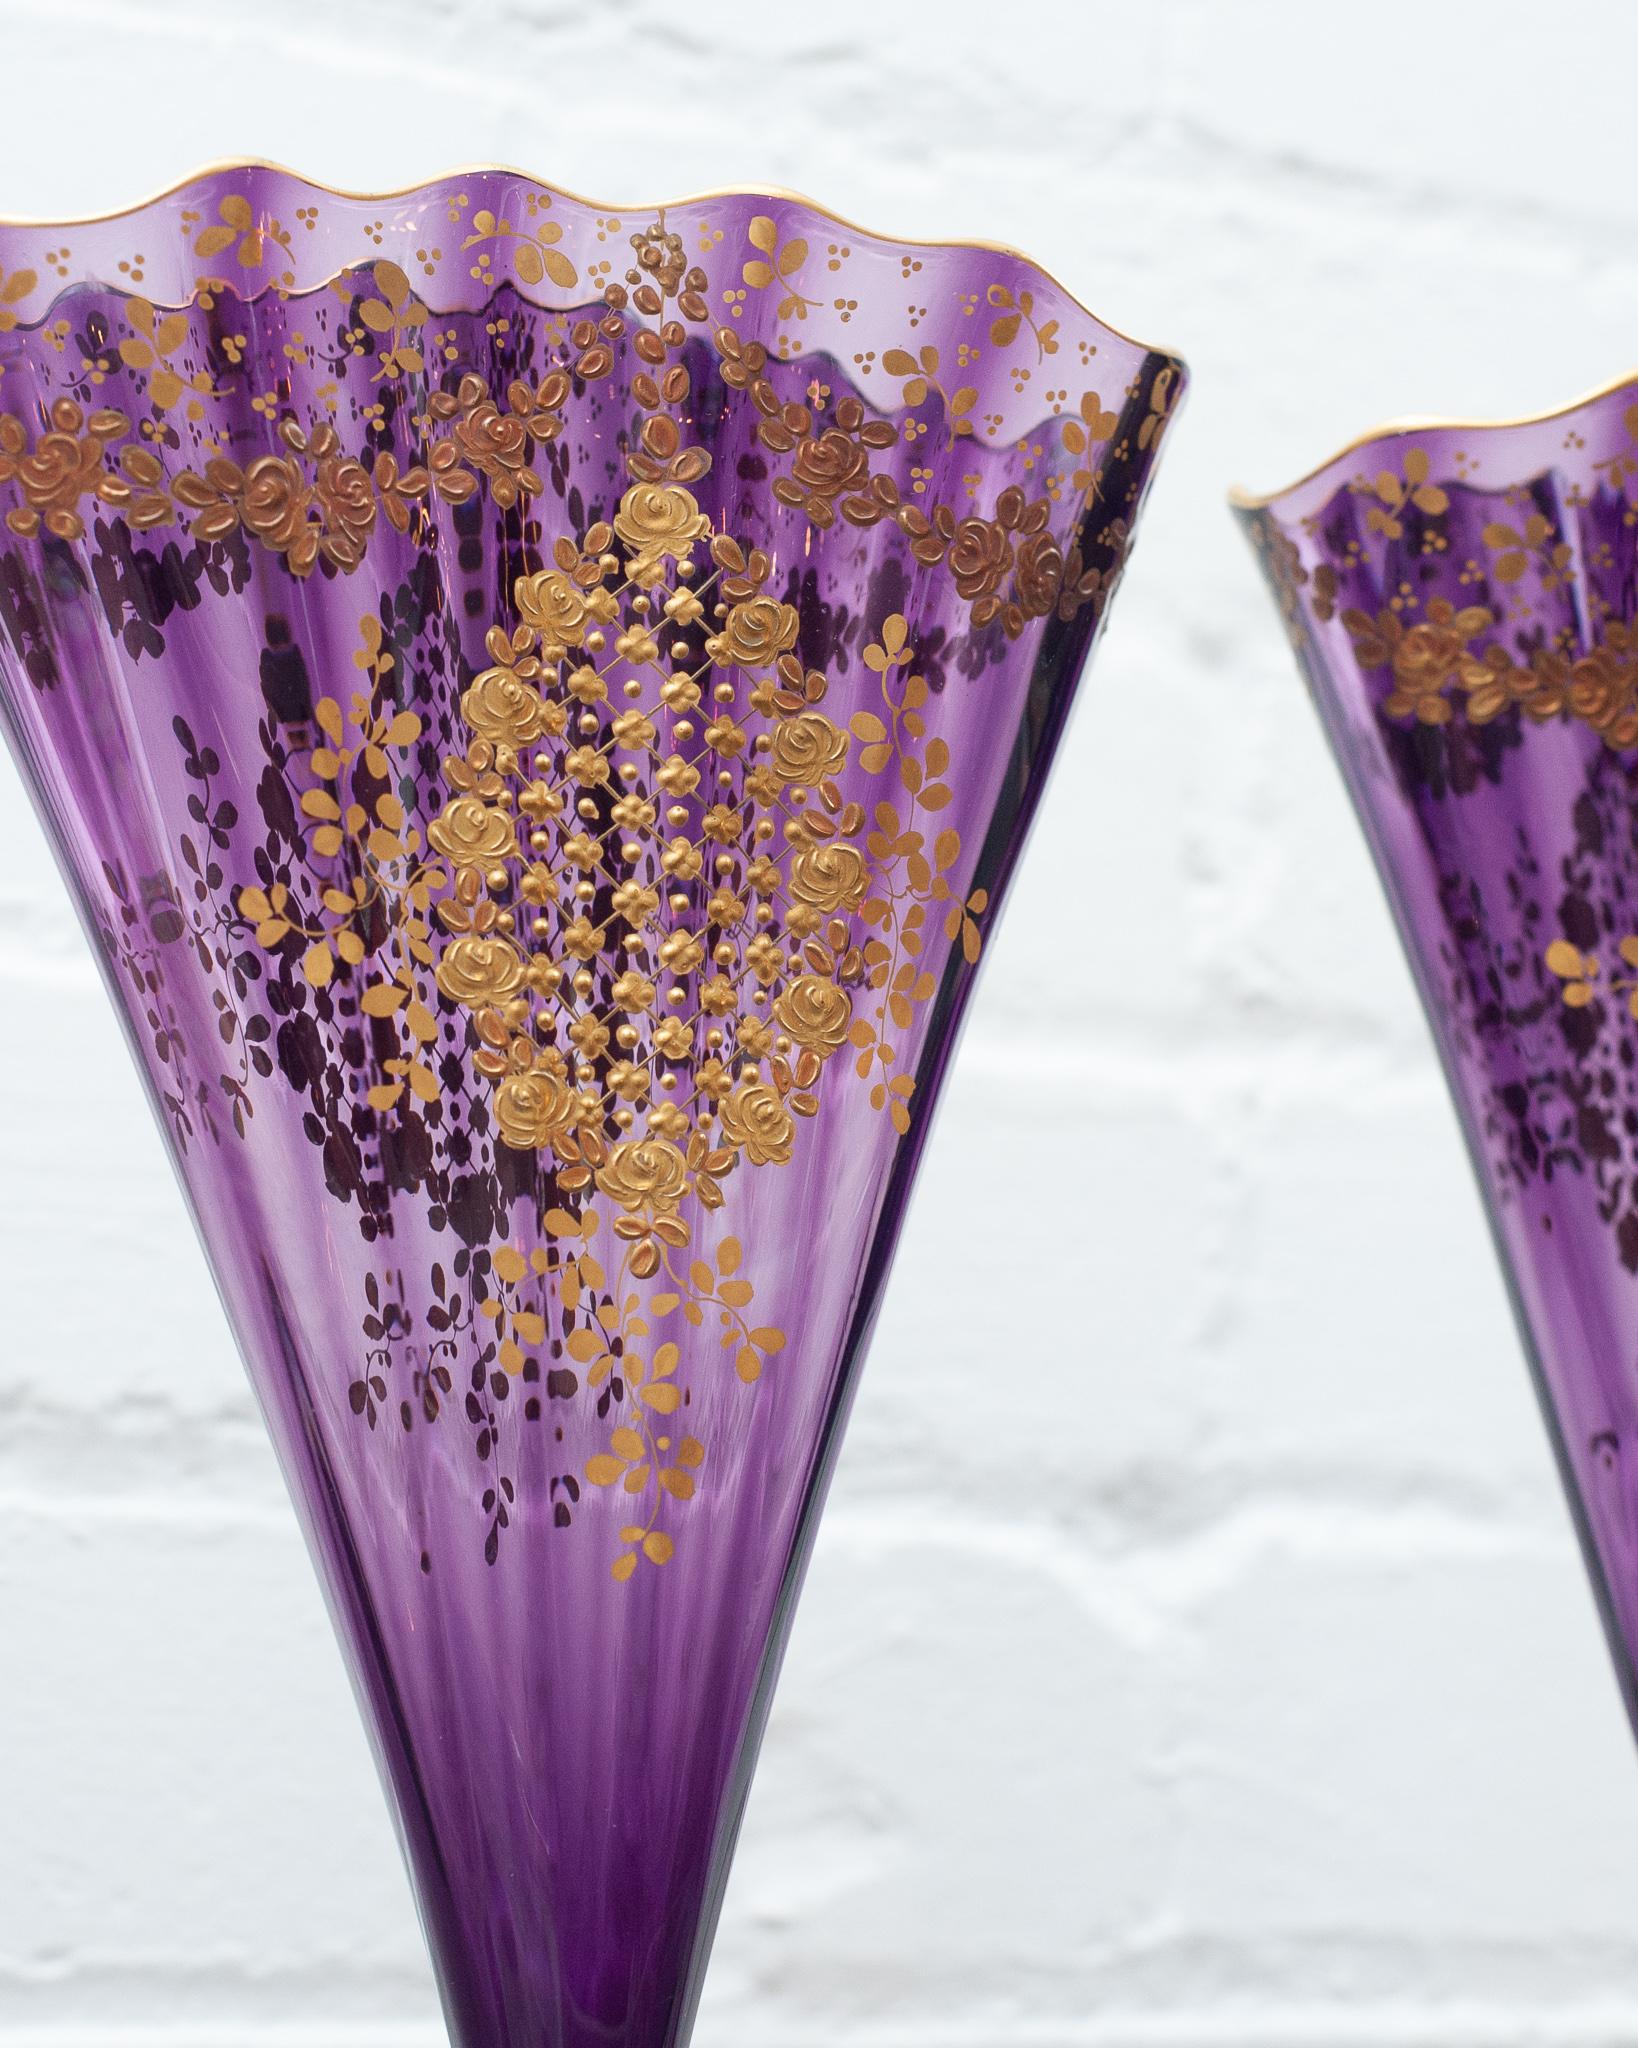 Gilt Antique Pair of Moser Amethyst Fan Vases with Elaborate Gilding